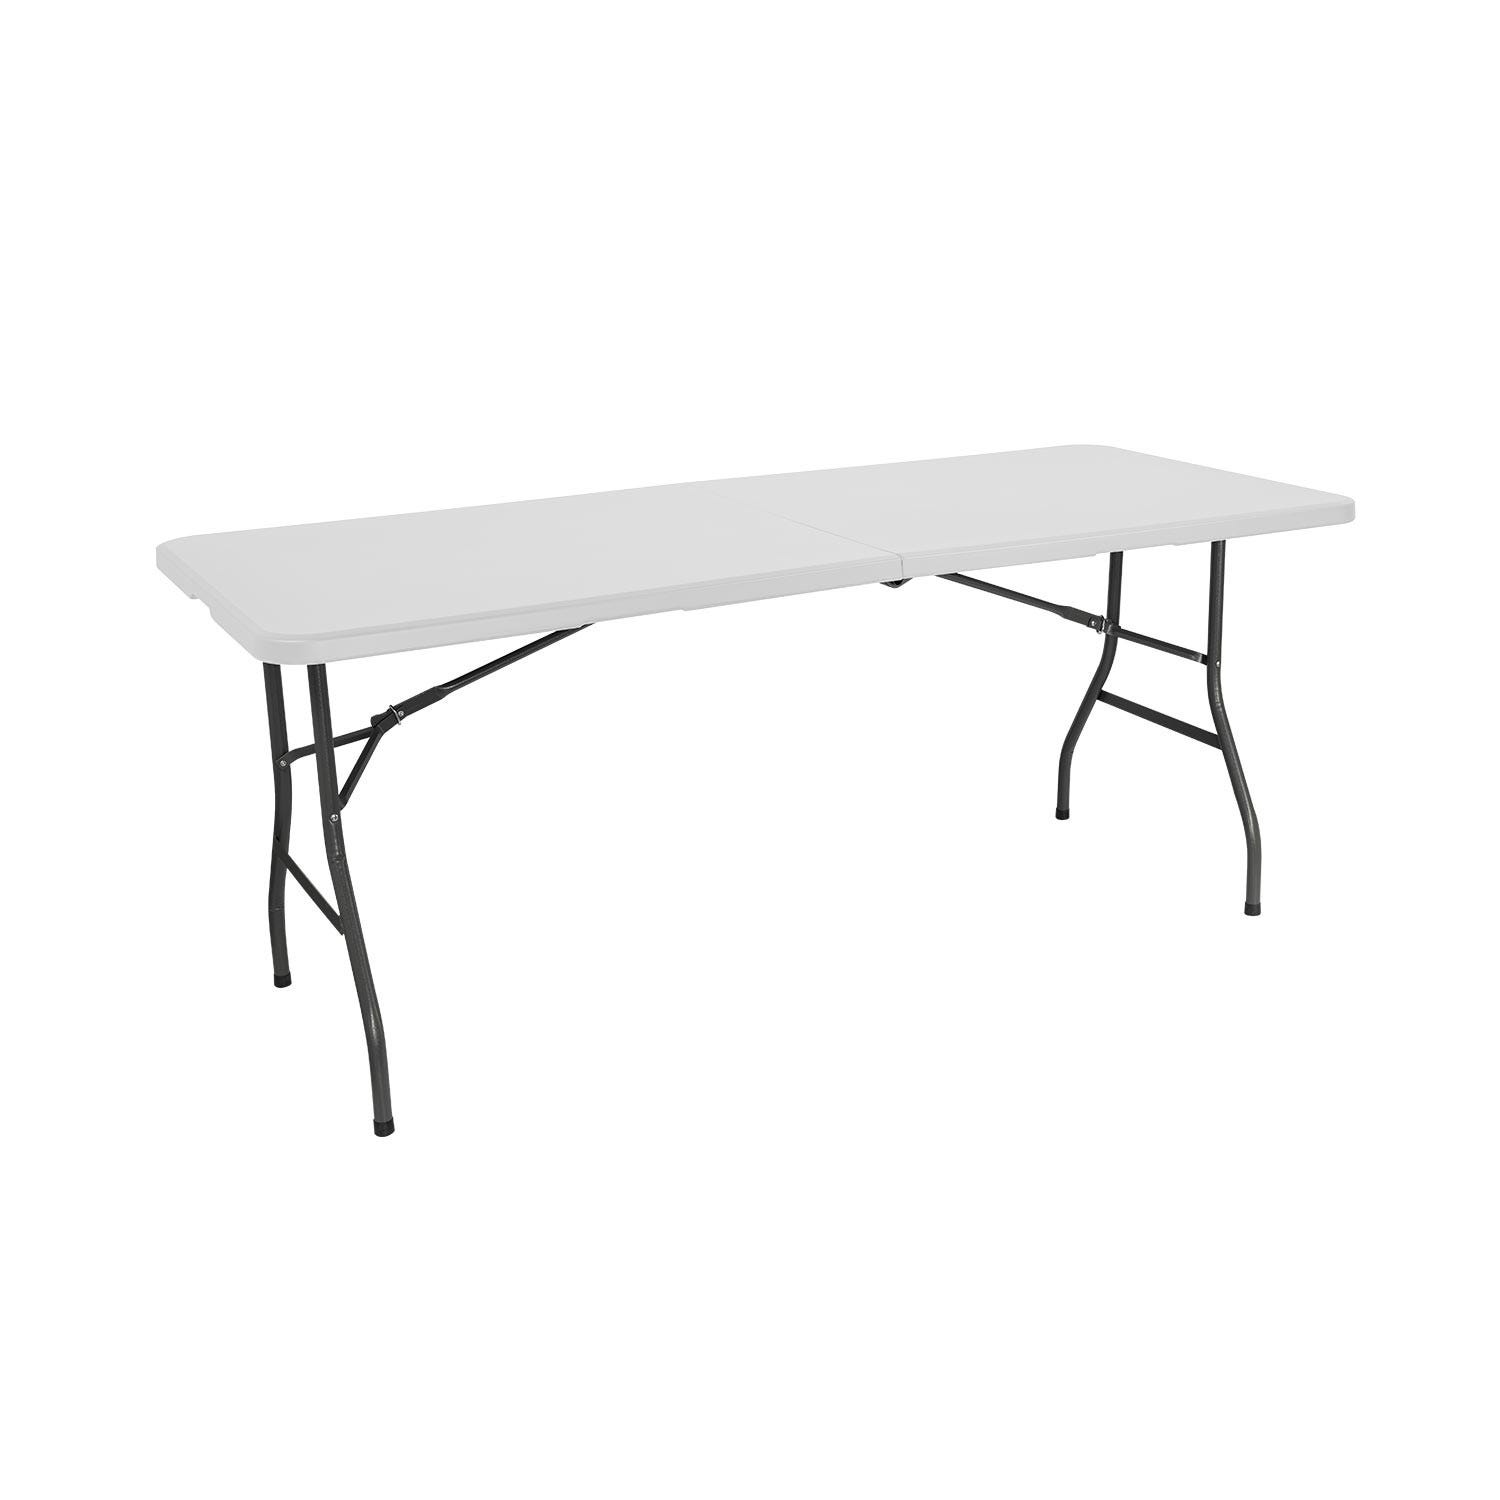 Table Pliante 240cm Rectangulaire Blanche Catering 7house